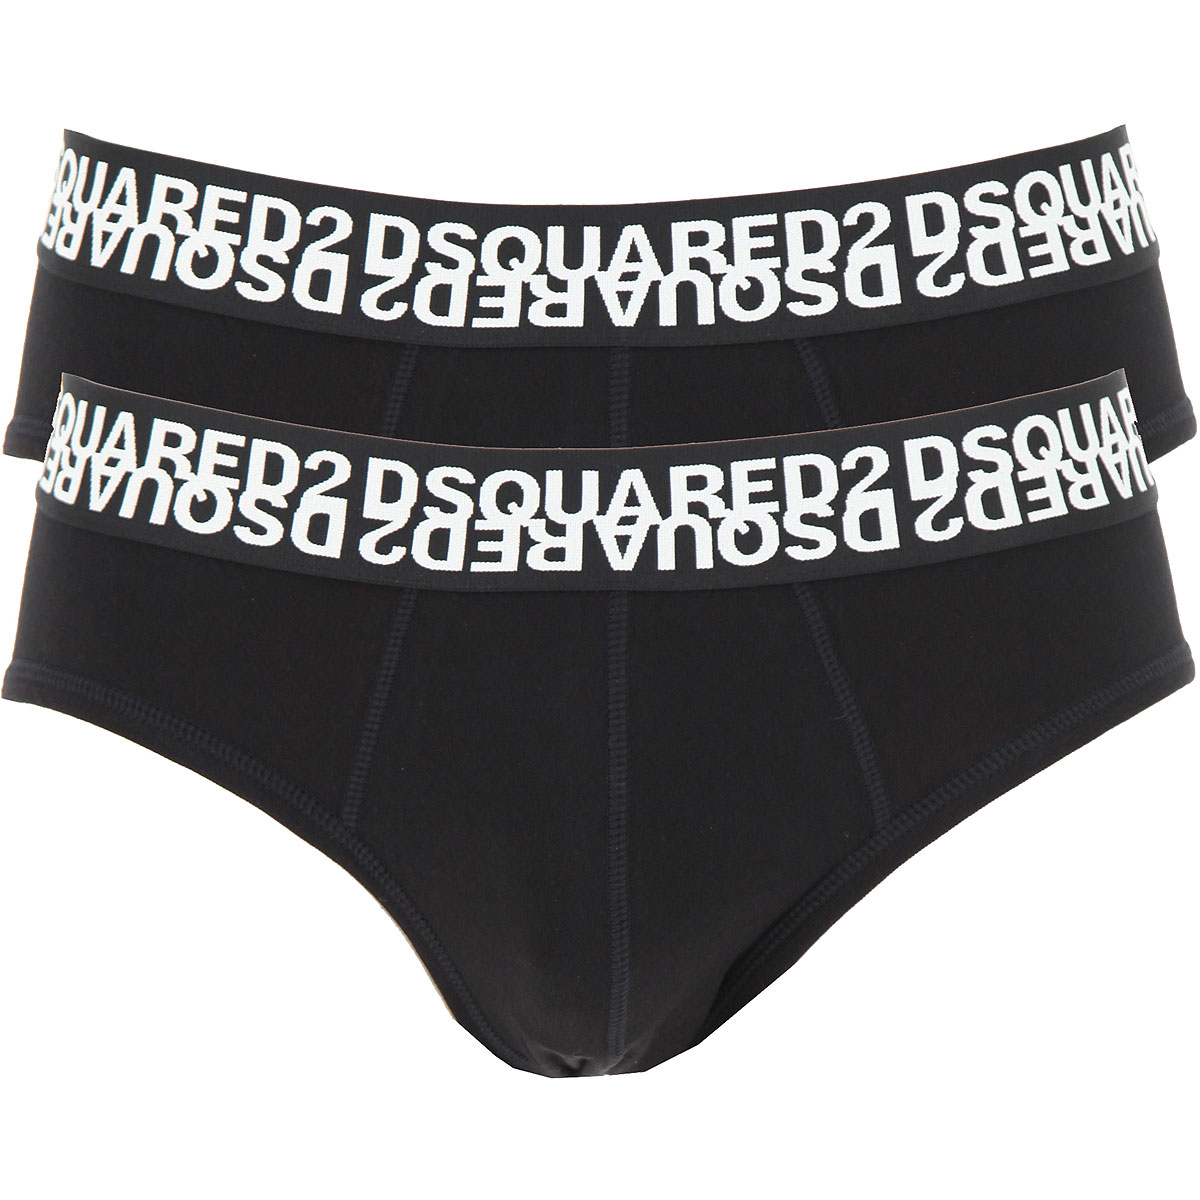 Mens Underwear Dsquared2, Style code: d9x612970_a1-001-